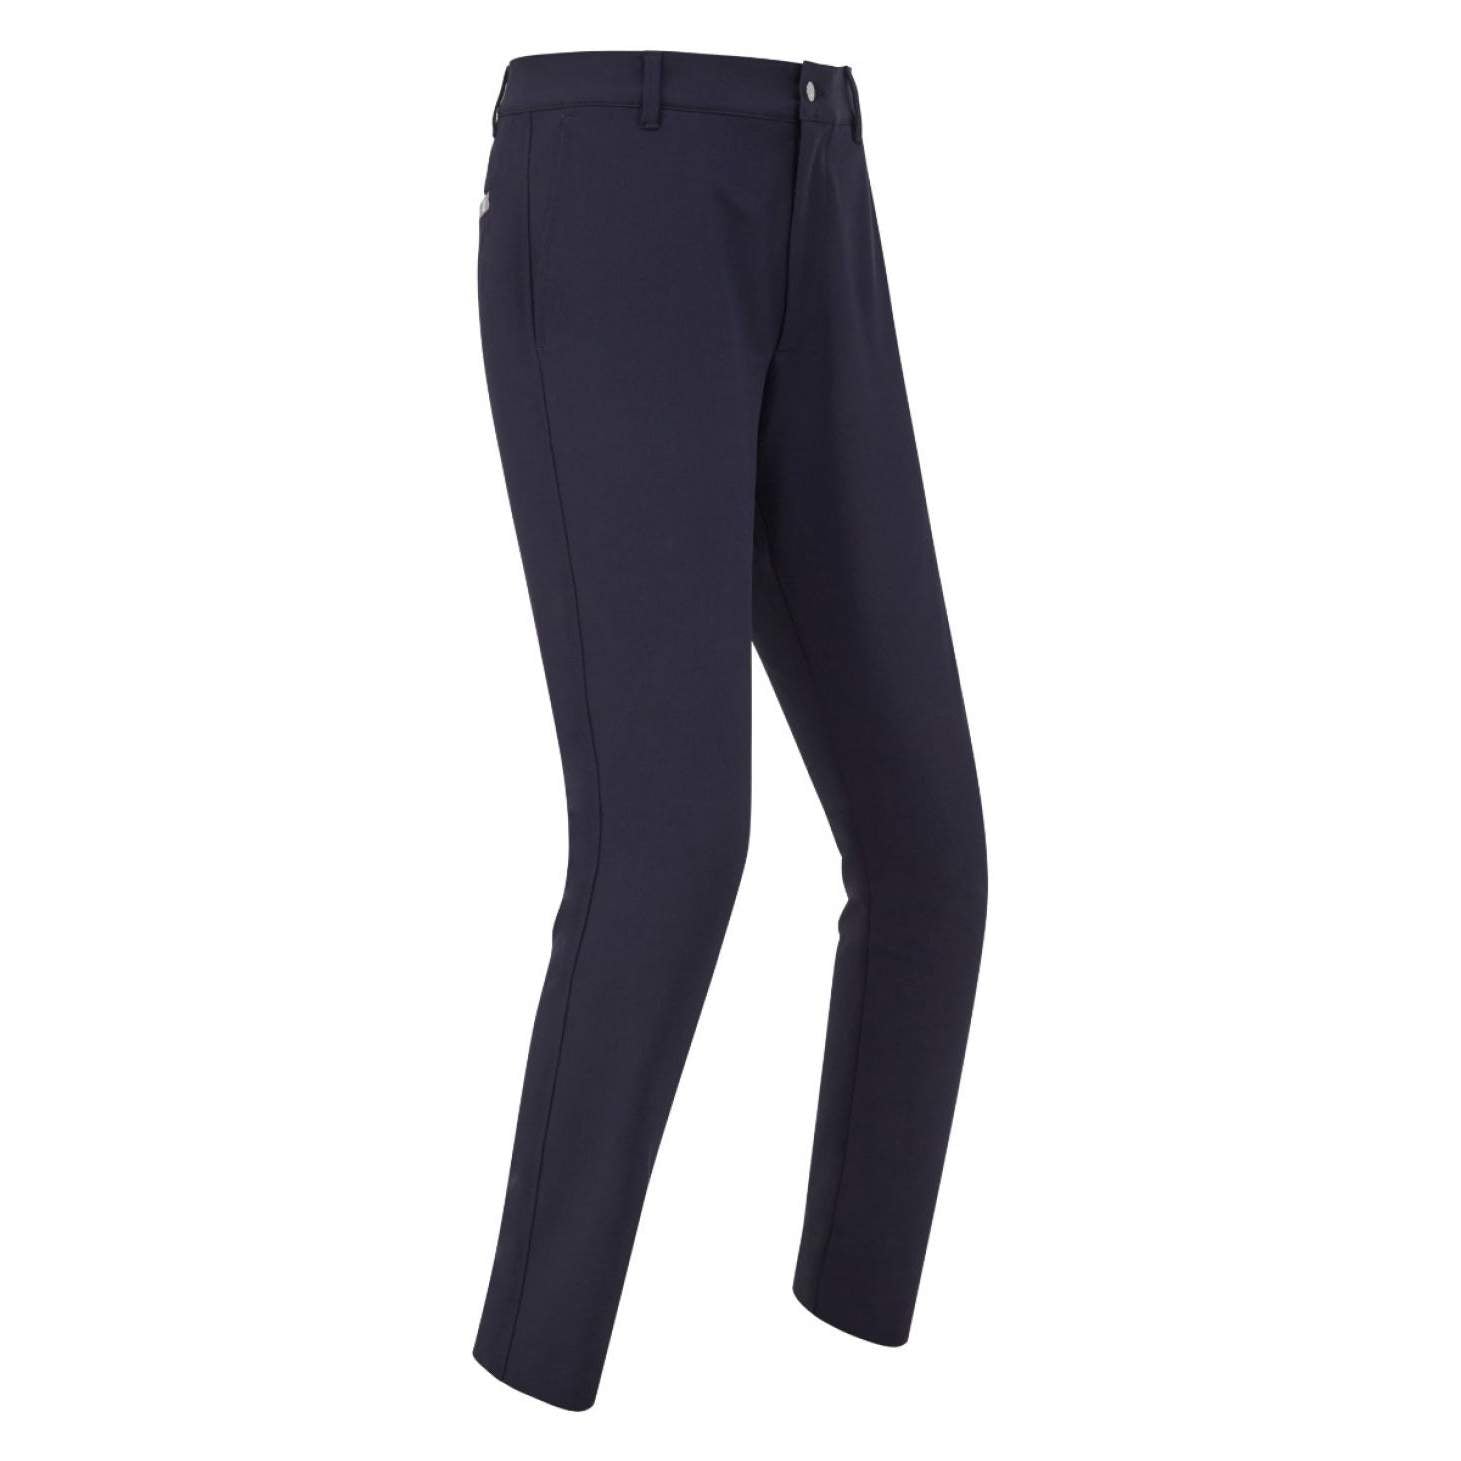 Footjoy Performance Tapered Golf Trouser 90168